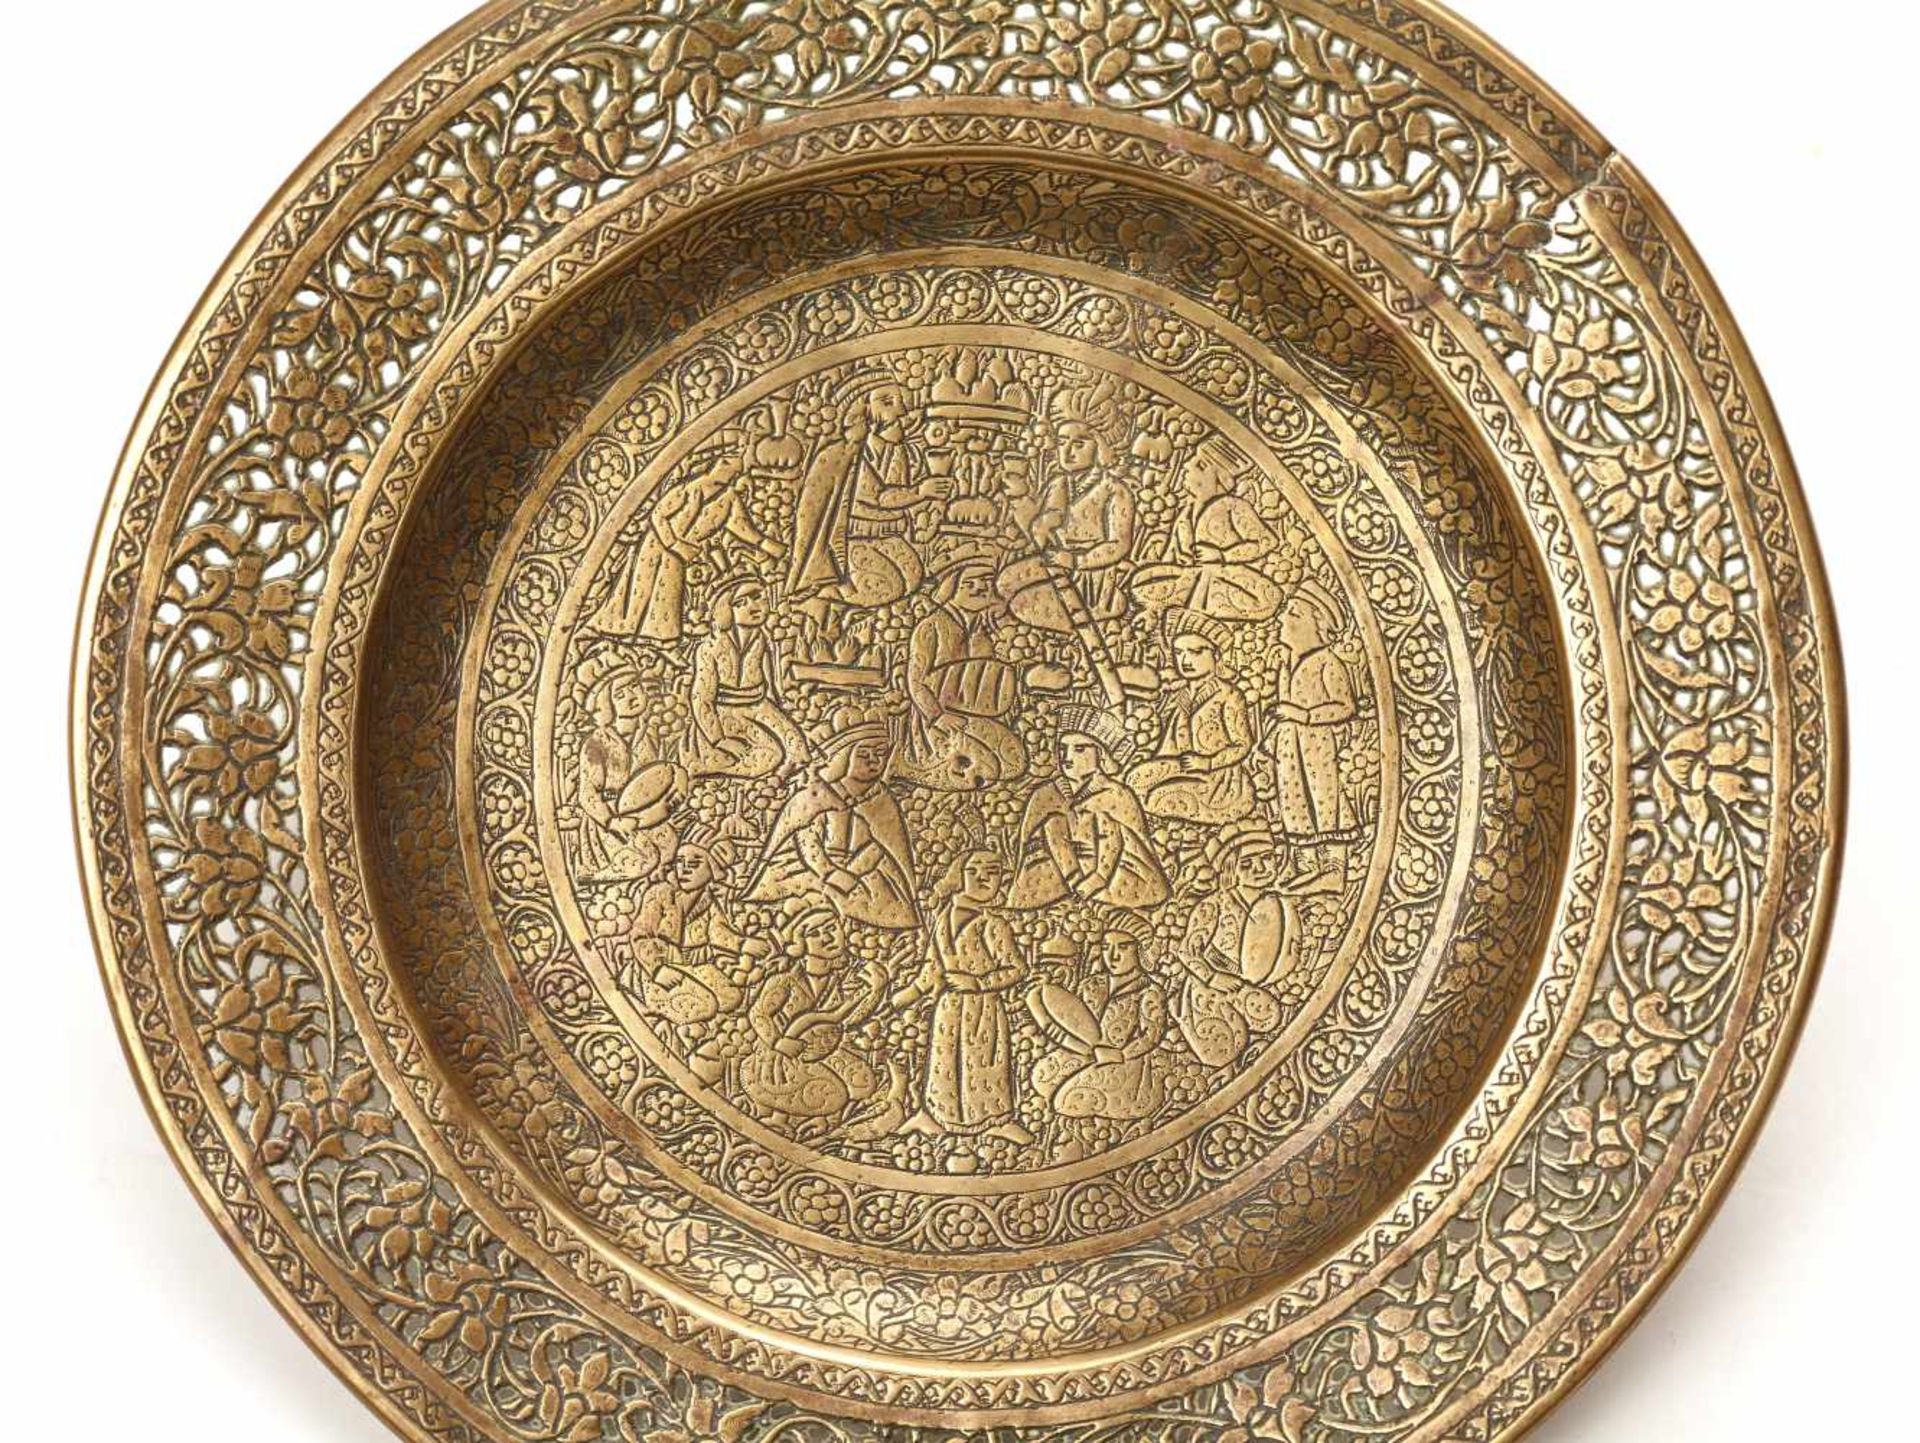 AN INDO-PERSIAN OPENWORKED BRASS PLATE, LATE 19TH CENTURYBrassIndia/Persia, late 19th centuryThis - Image 2 of 4